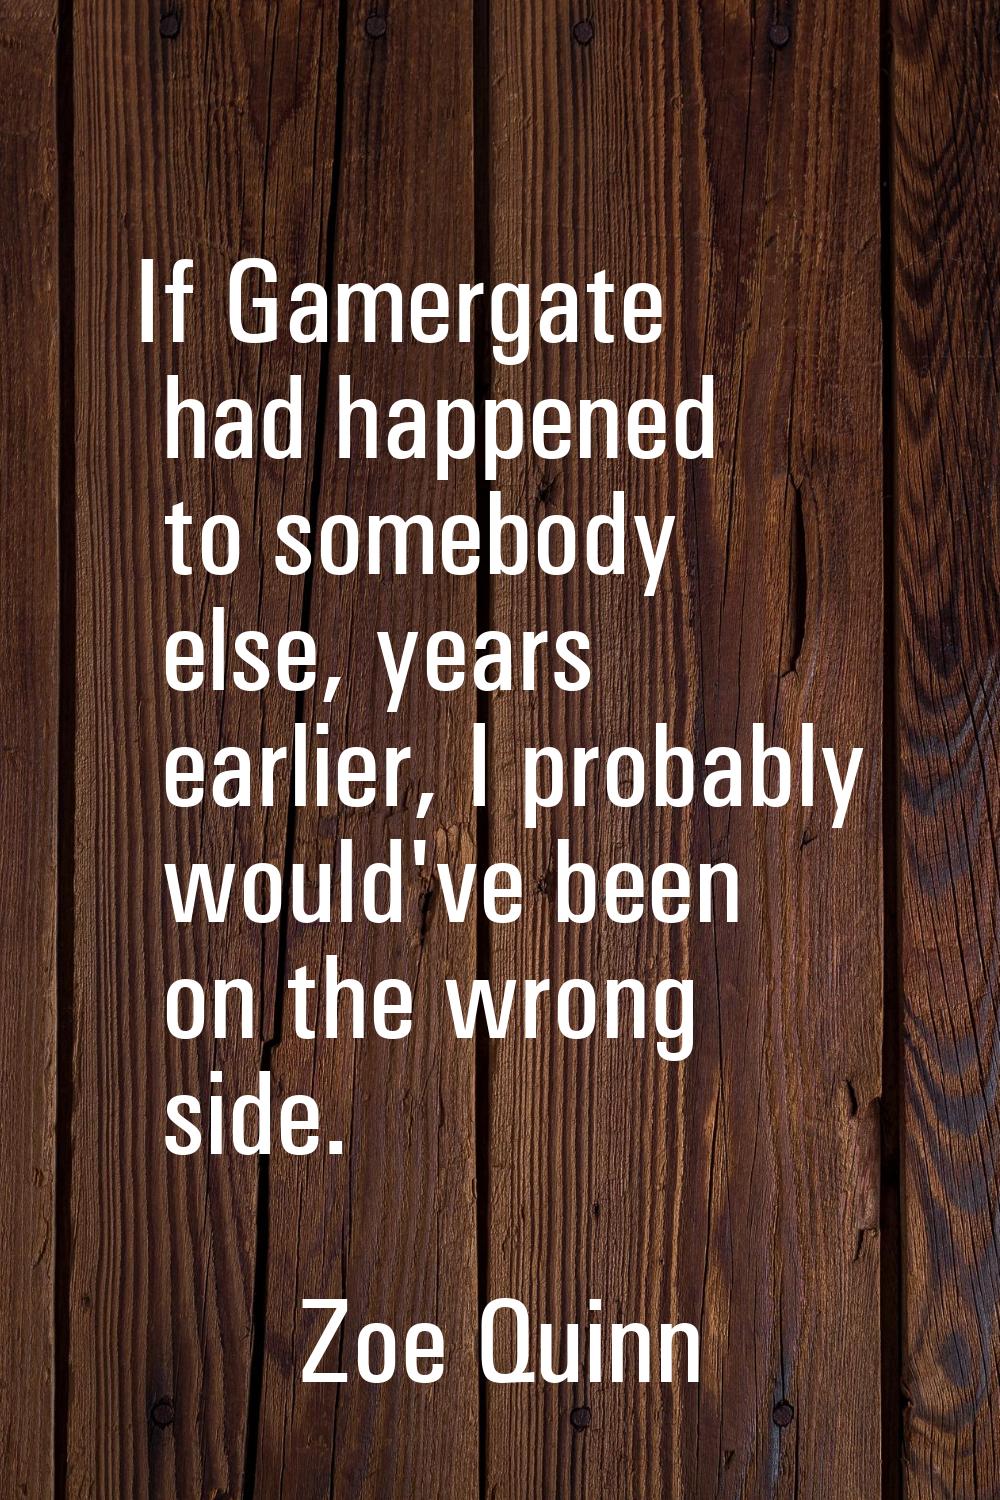 If Gamergate had happened to somebody else, years earlier, I probably would've been on the wrong si